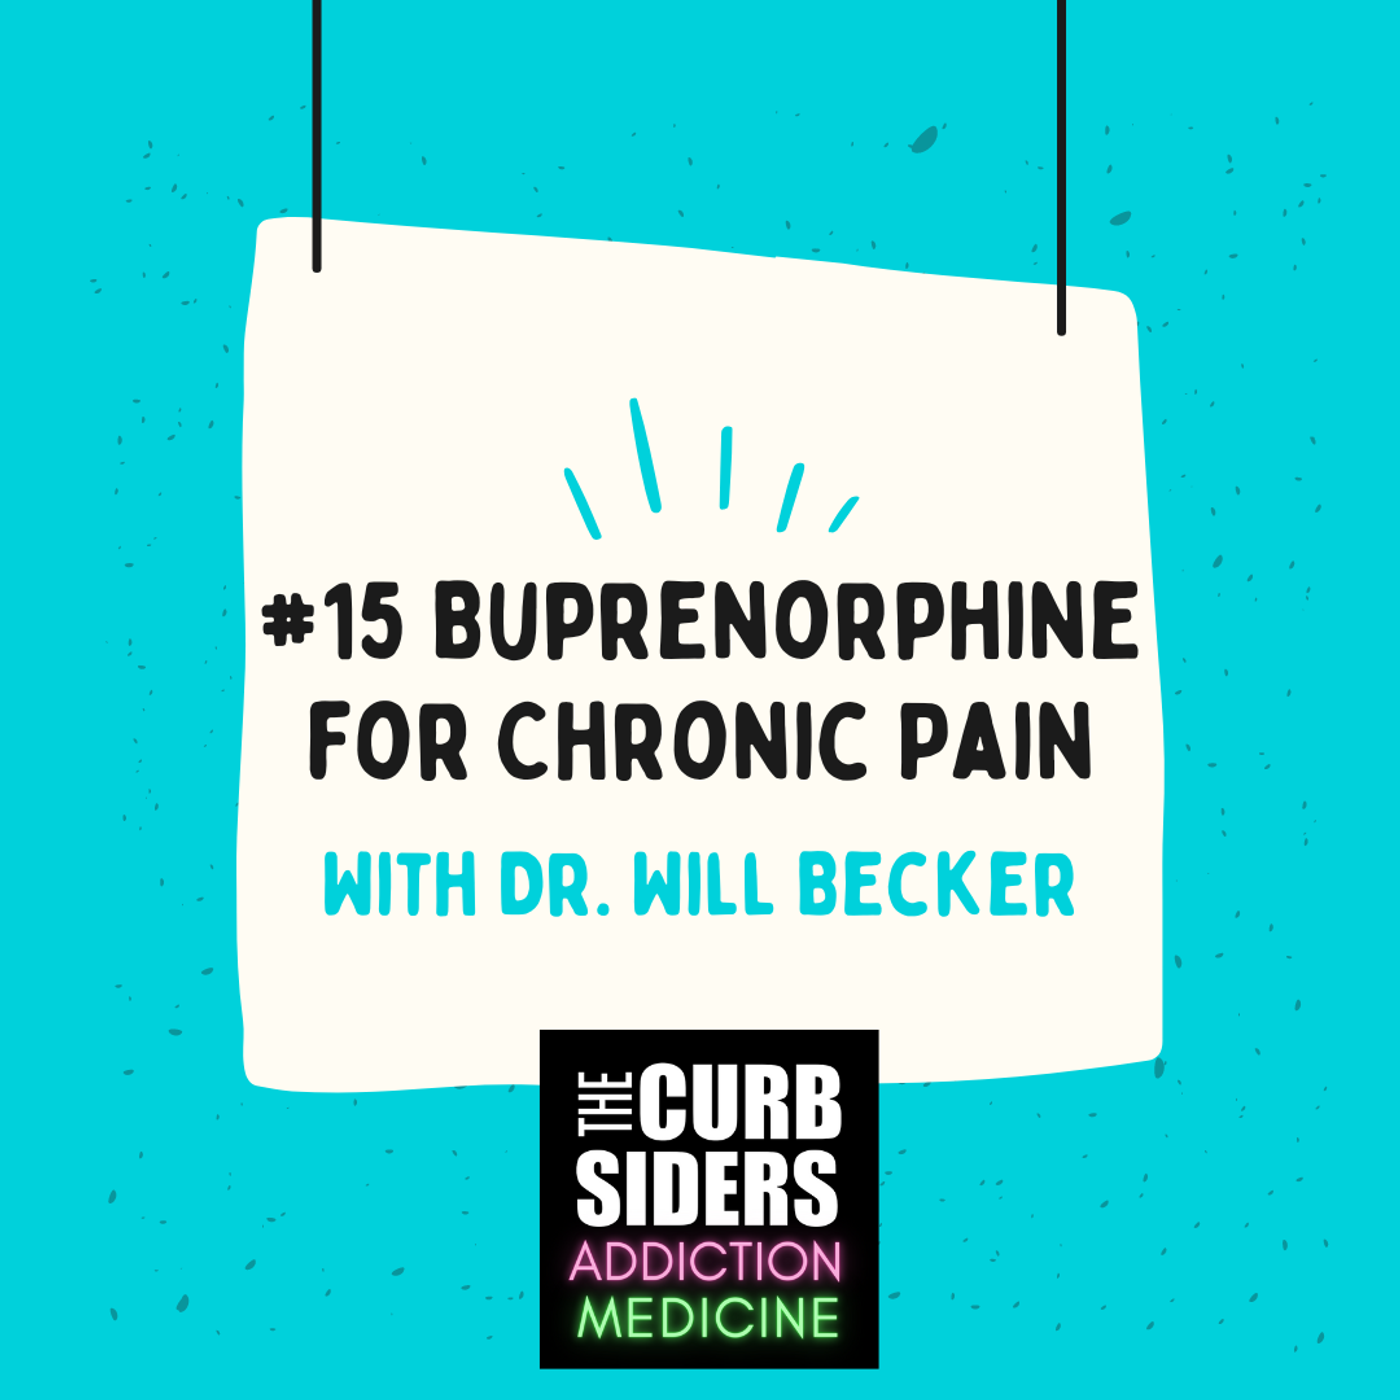 S2 Ep4: #15 Buprenorphine for Chronic Pain with Dr. Will Becker